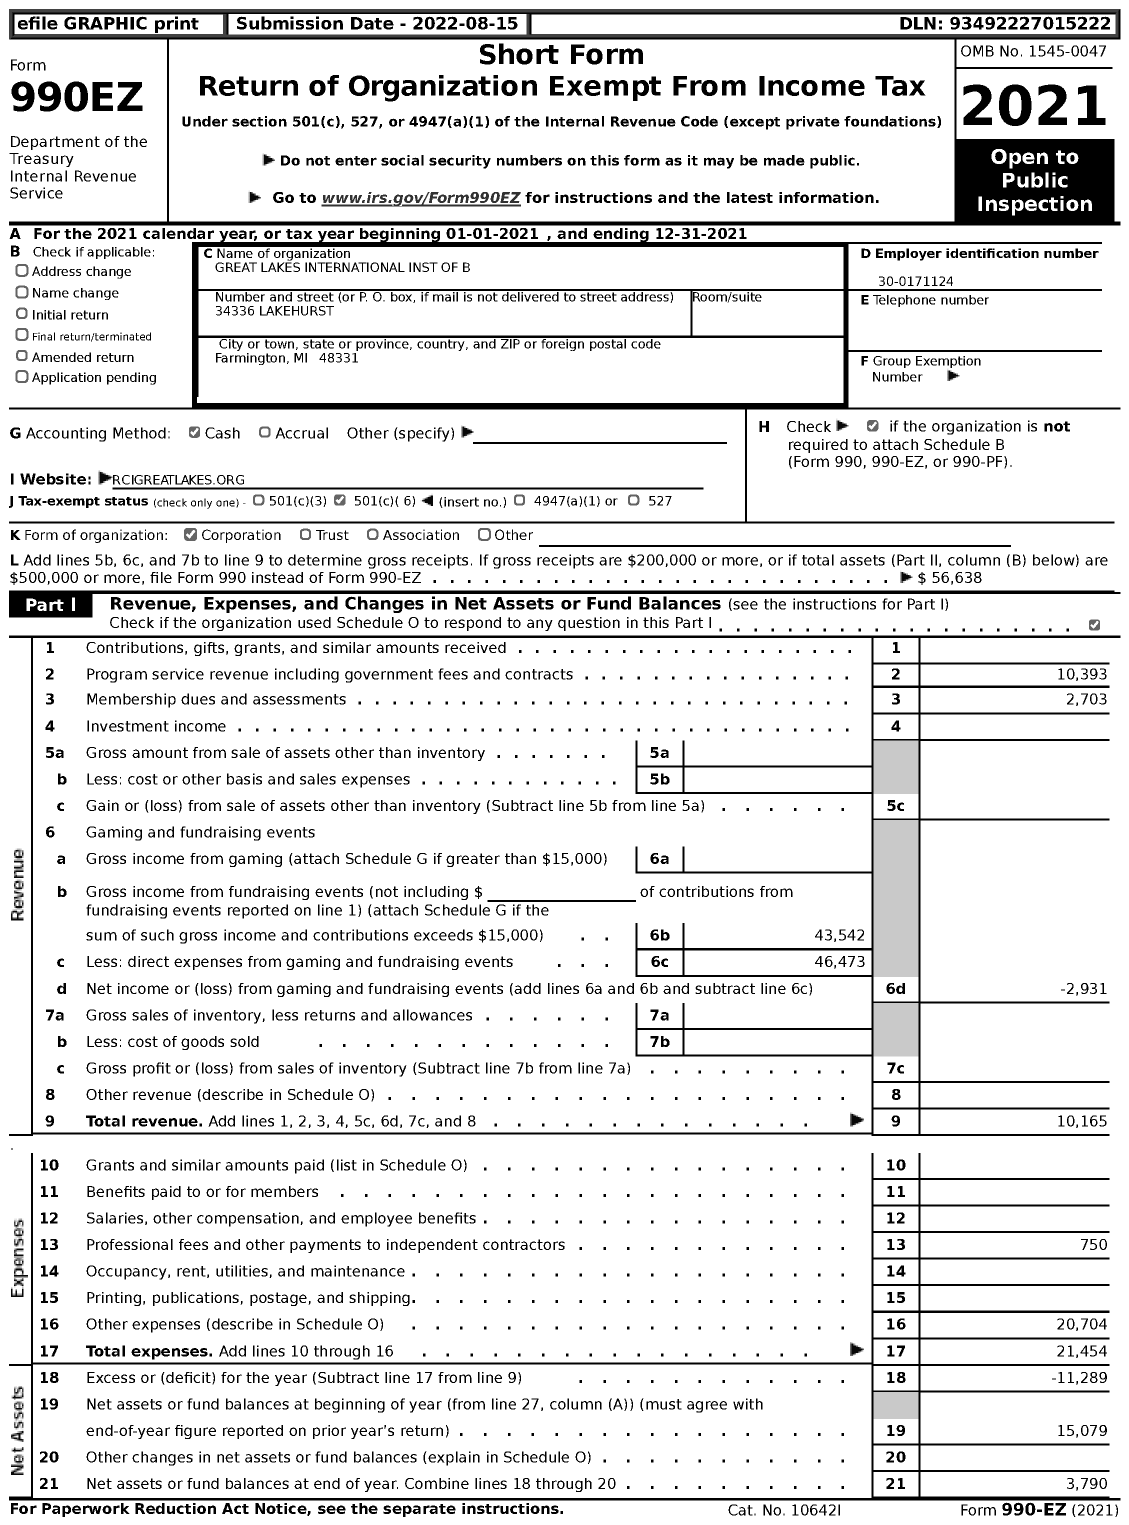 Image of first page of 2021 Form 990EZ for Great Lakes International Inst of B